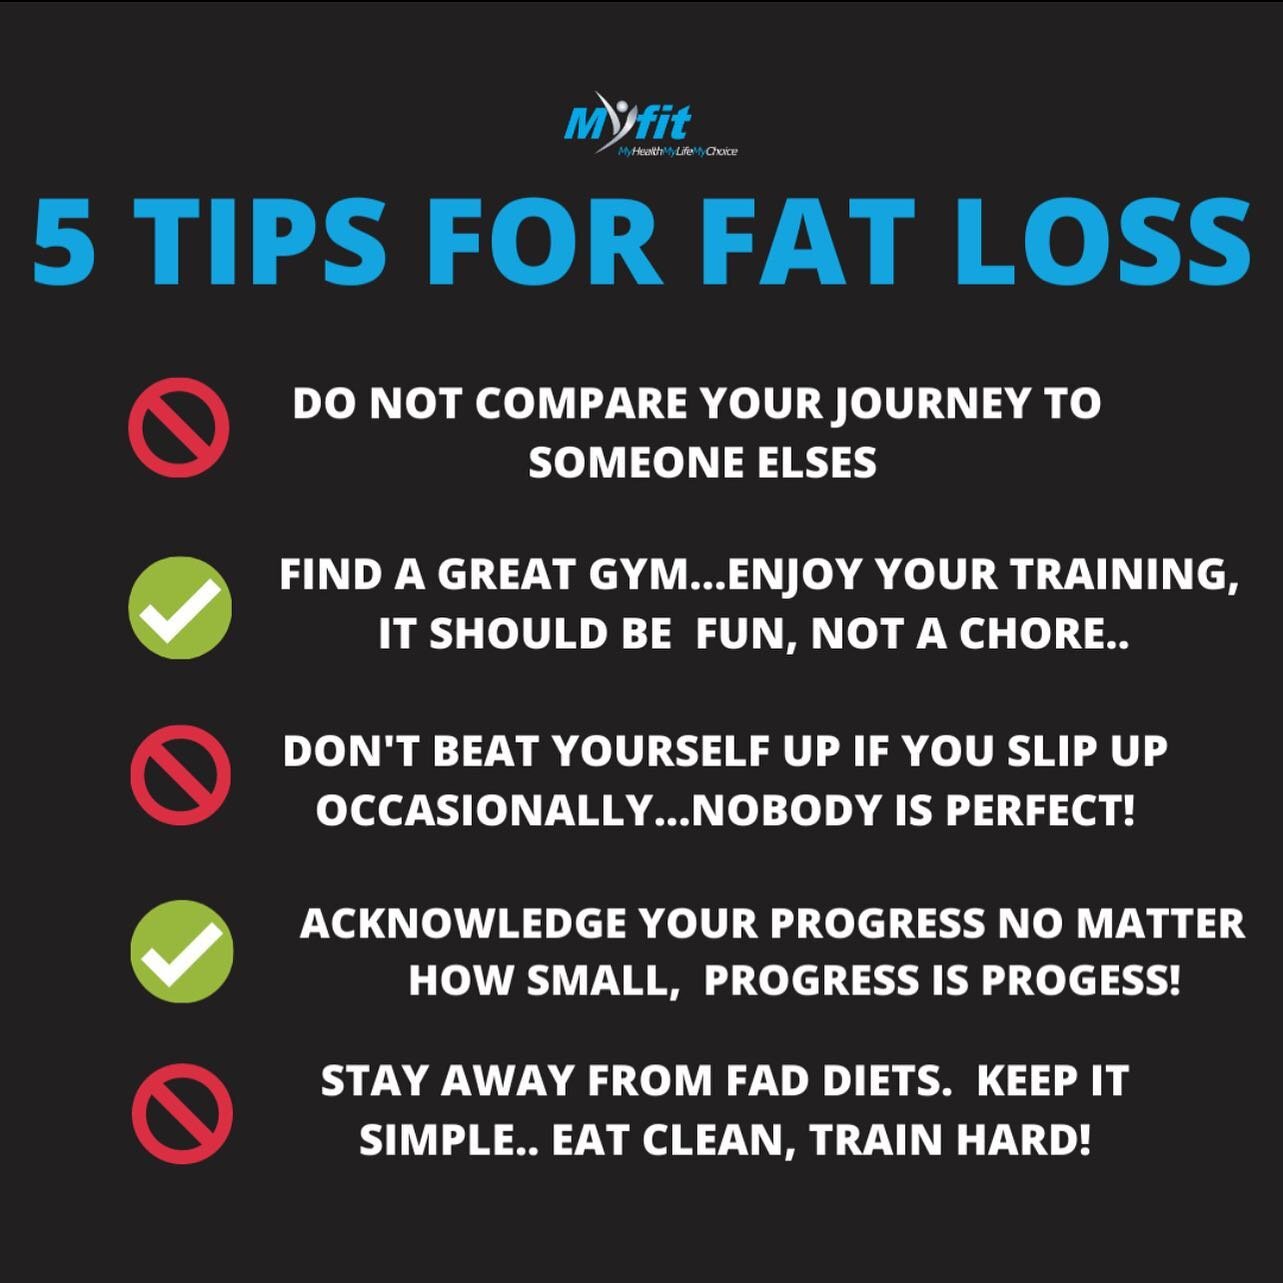 We could bang on for ages about all the tips for fat loss..however I&rsquo;m sure you have heard them all before ... a lot of it is mindset, so don&rsquo;t sweat the small stuff 

You&rsquo;ve got this!!! 
🥬🥦🏋️&zwj;♂️🏋️&zwj;♂️🤸🏽&zwj;♀️⛹🏽🤾🏽&z